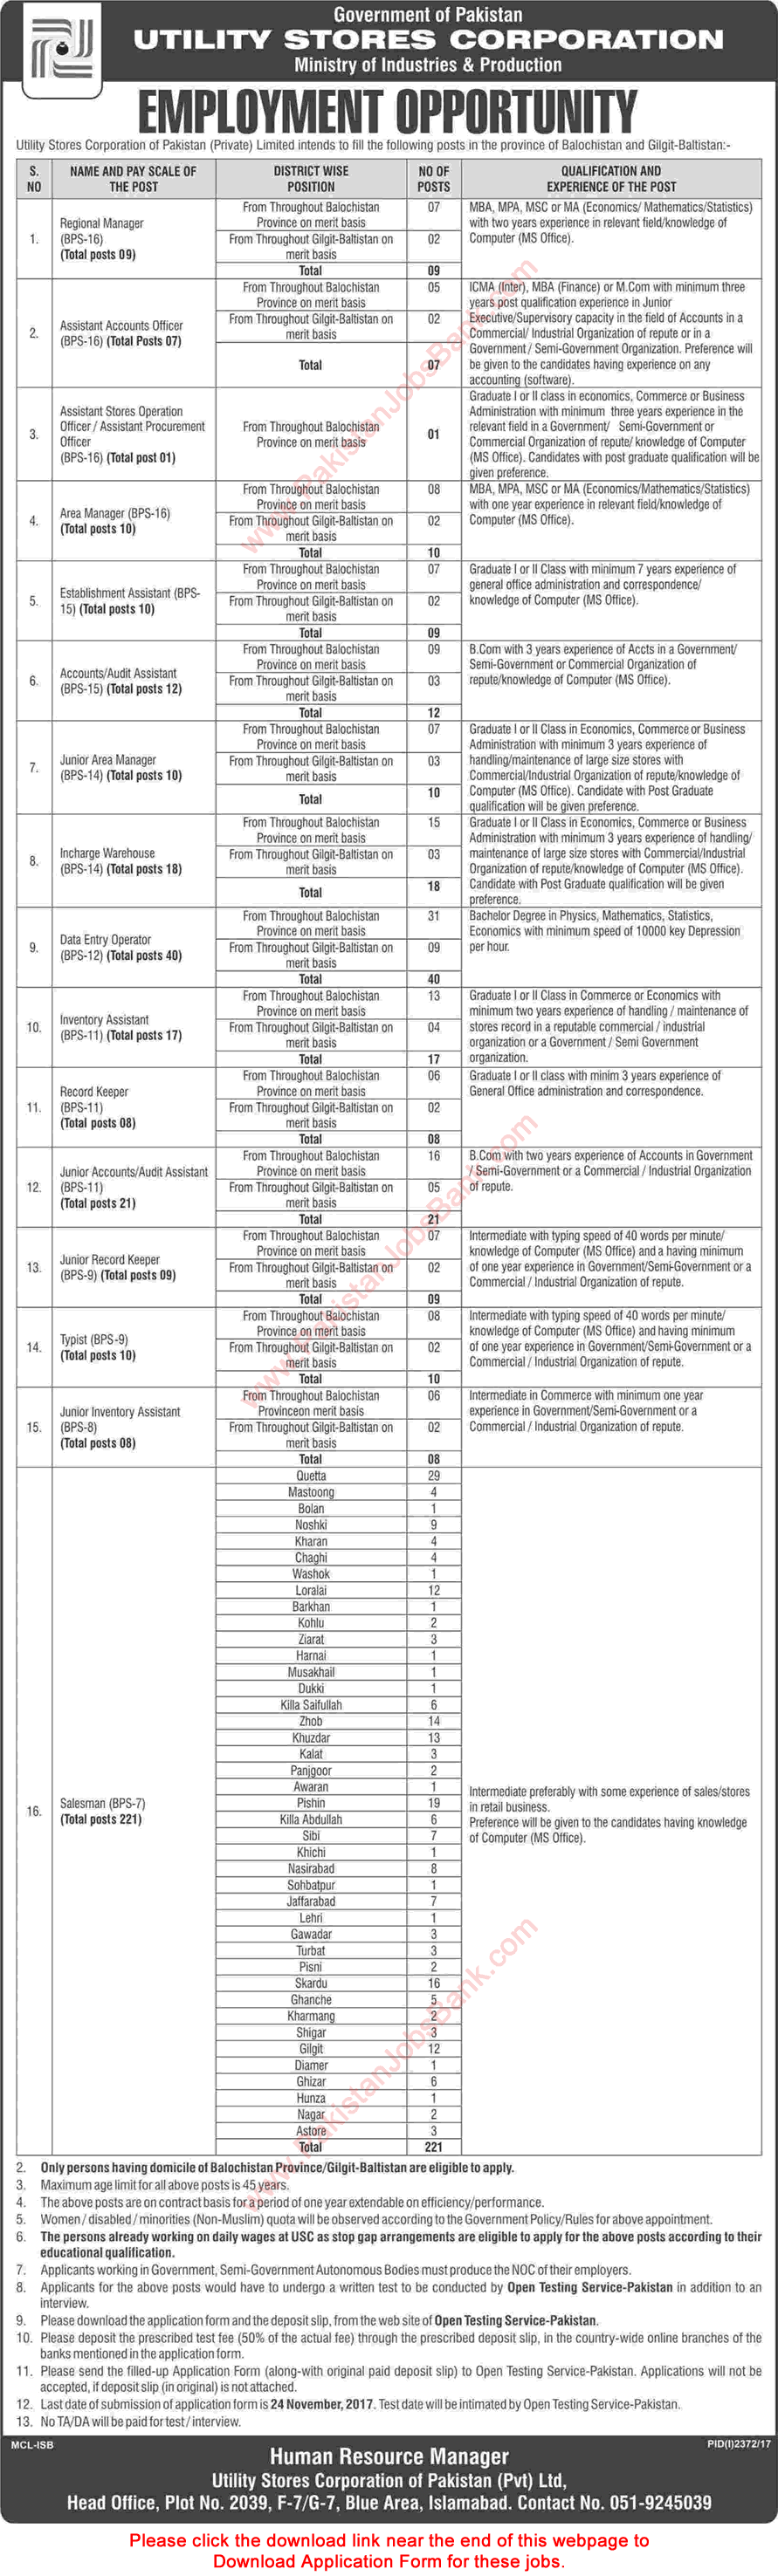 Utility Stores Corporation Jobs November 2017 OTS Application Form Salesman, DEO & Others Latest / New